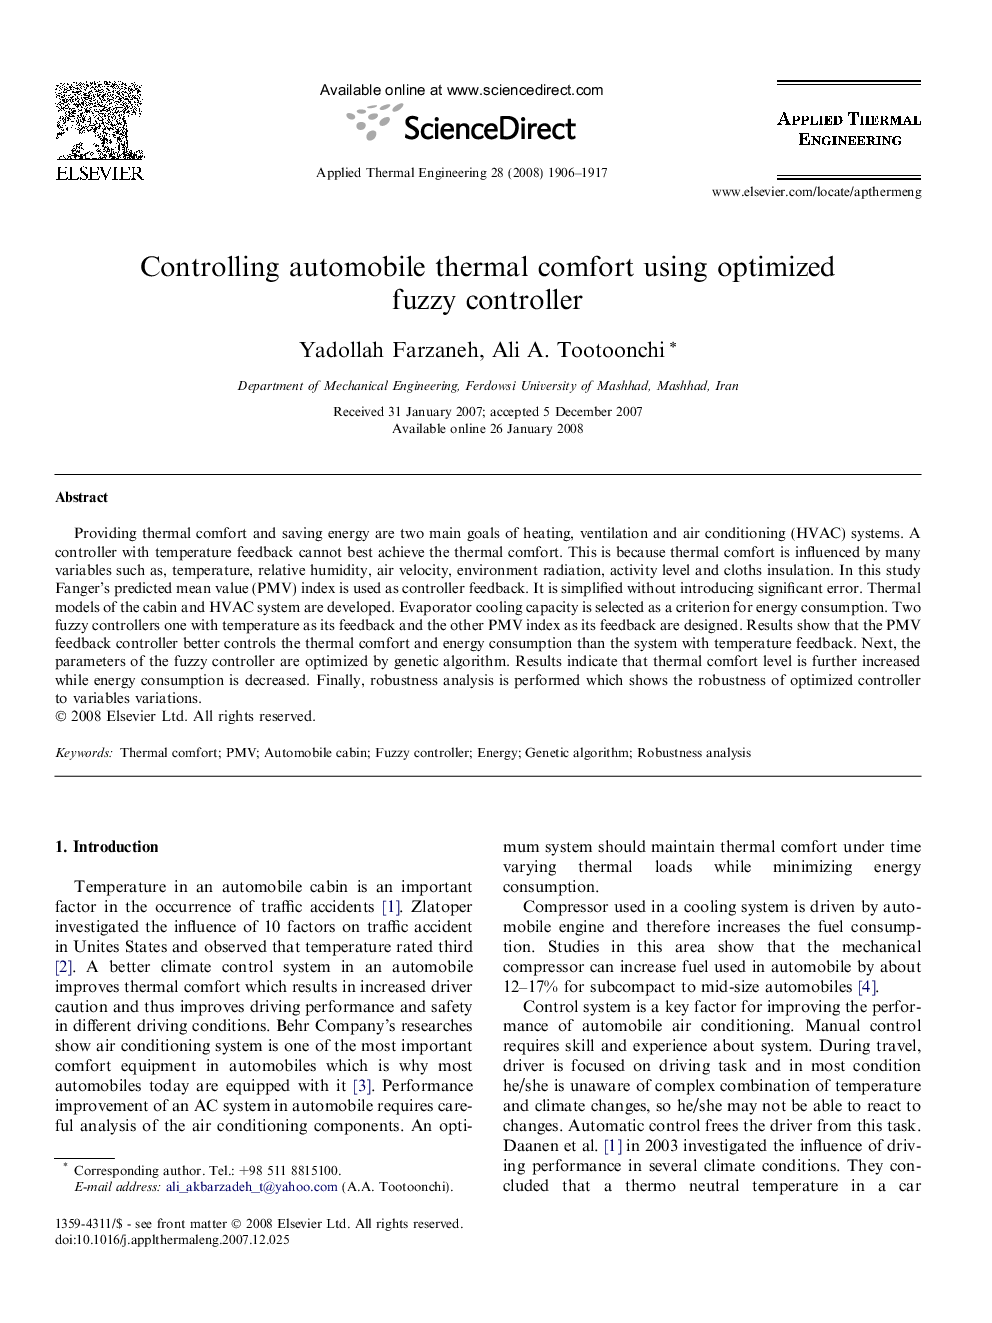 Controlling automobile thermal comfort using optimized fuzzy controller